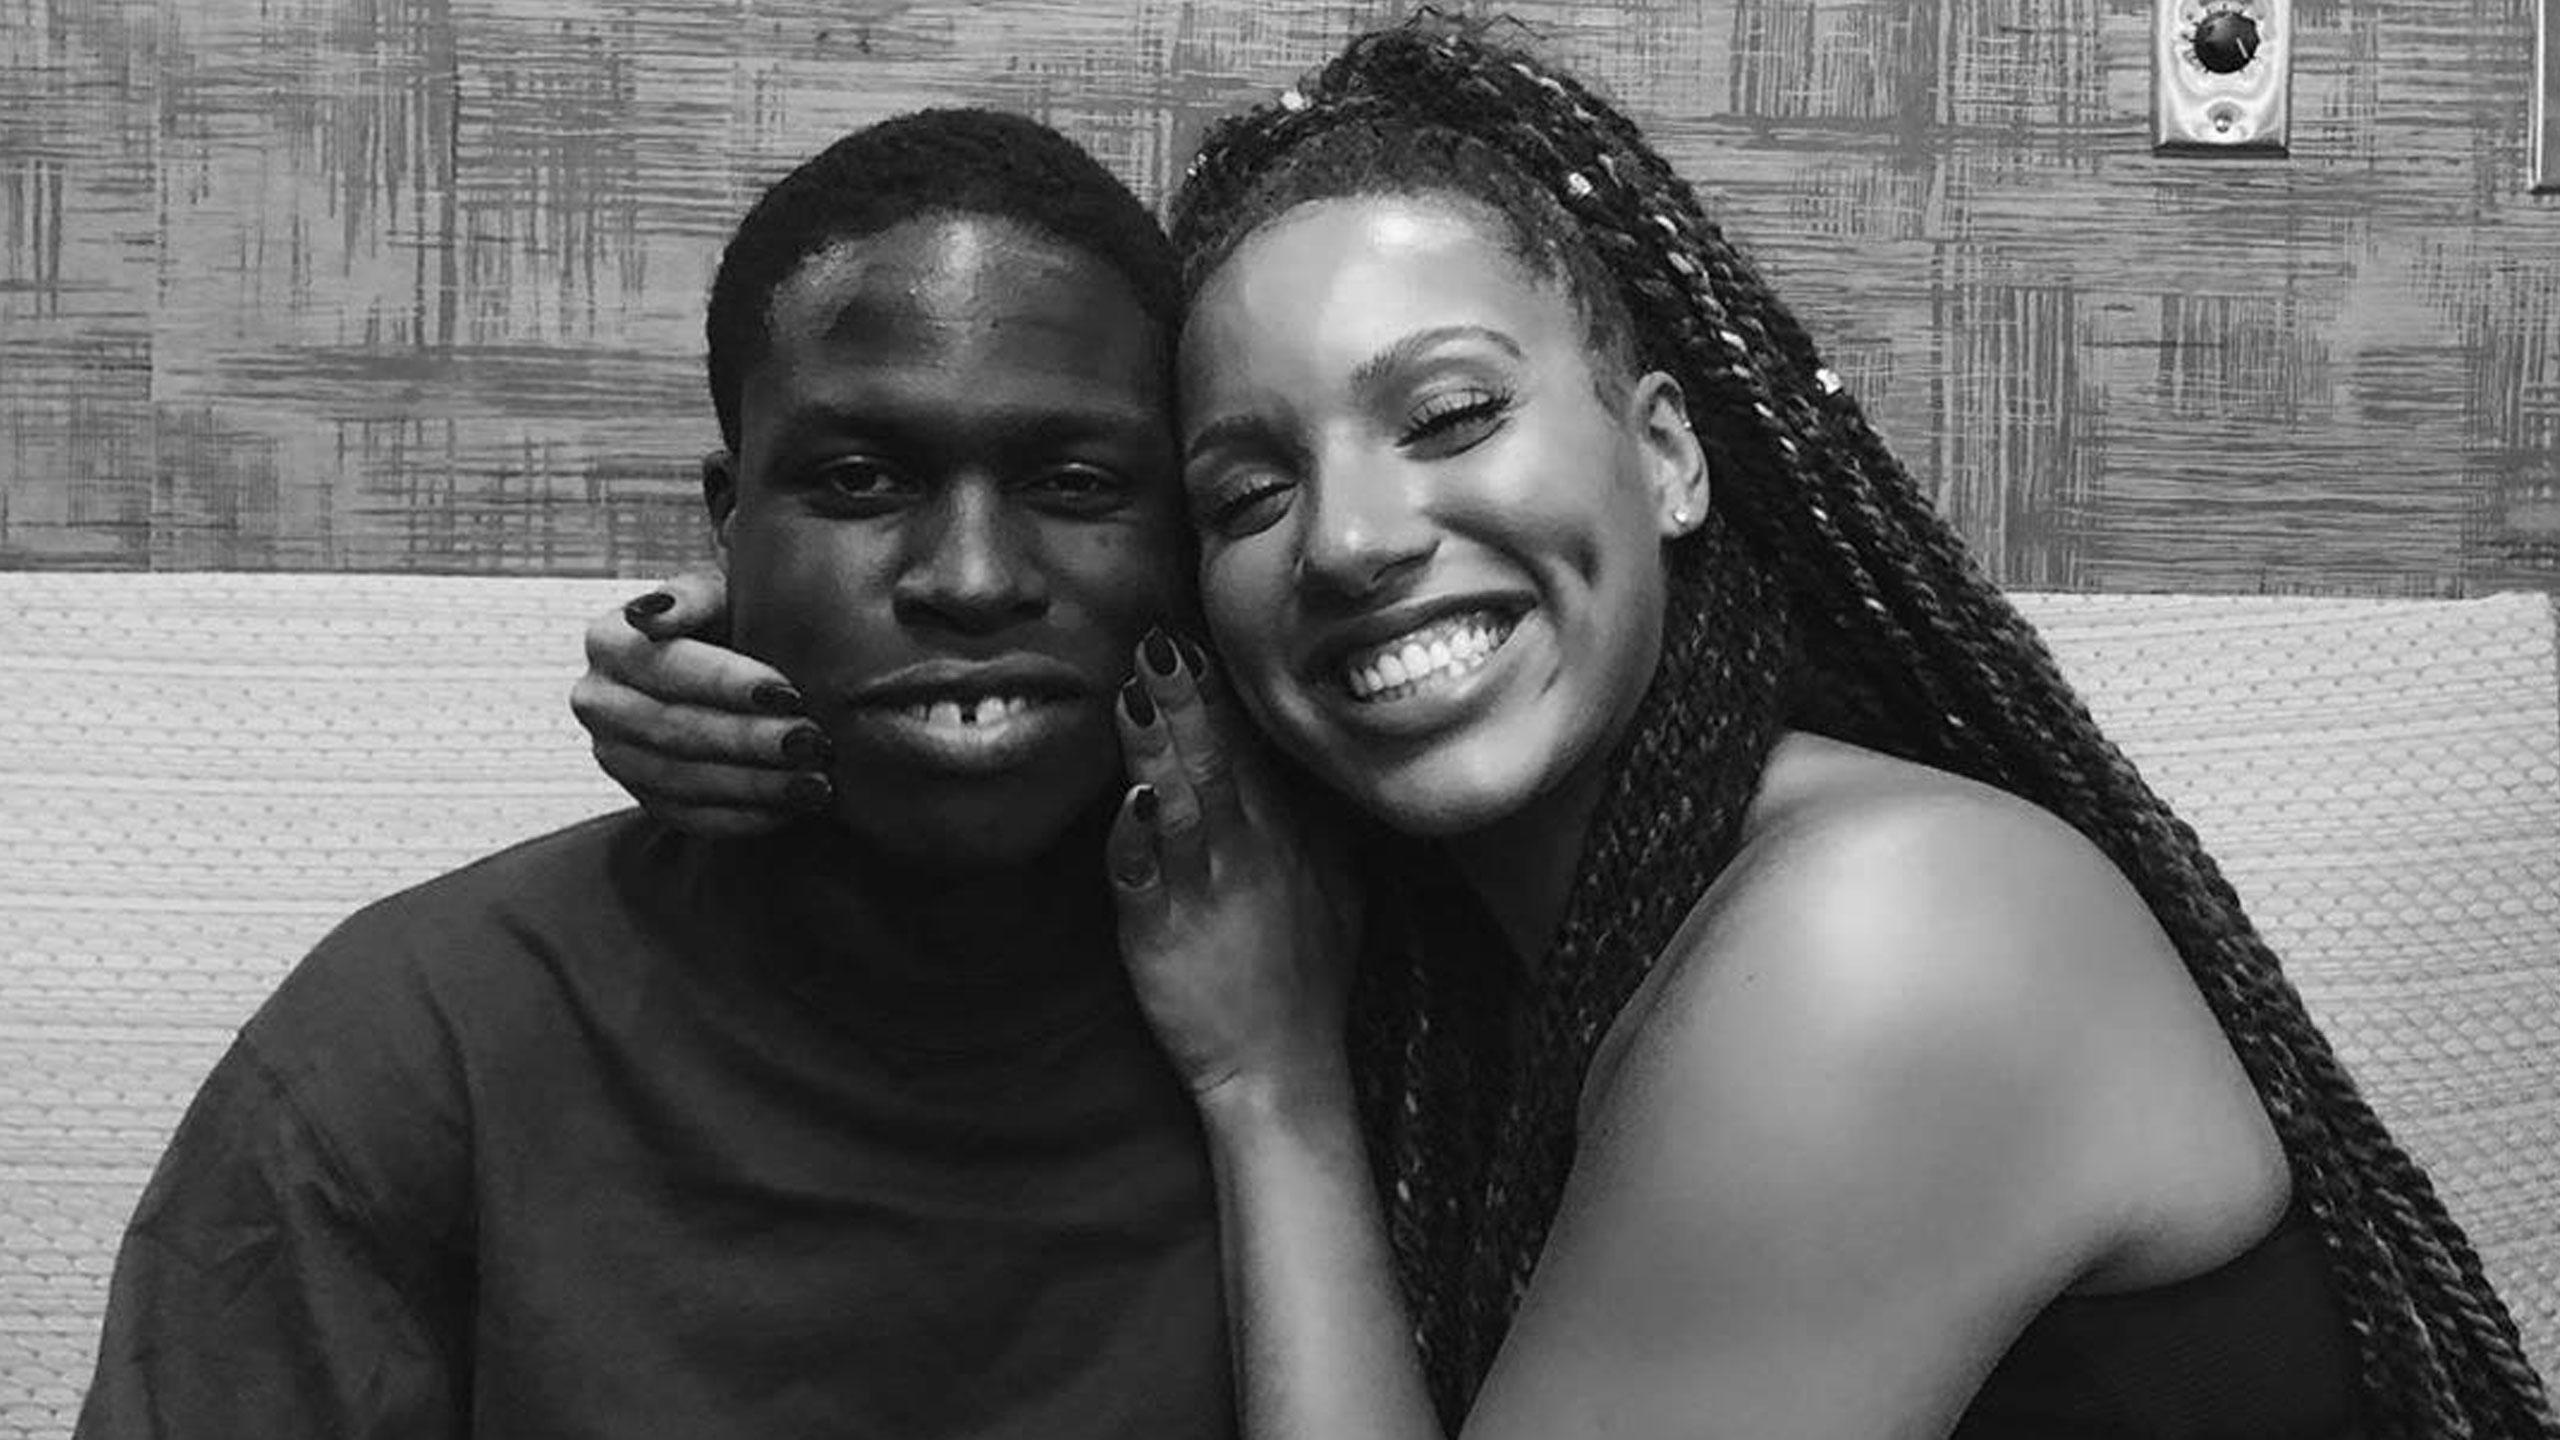 Elise Mariah Armstrong-Peart smiling with and embracing Daniel Caesar.